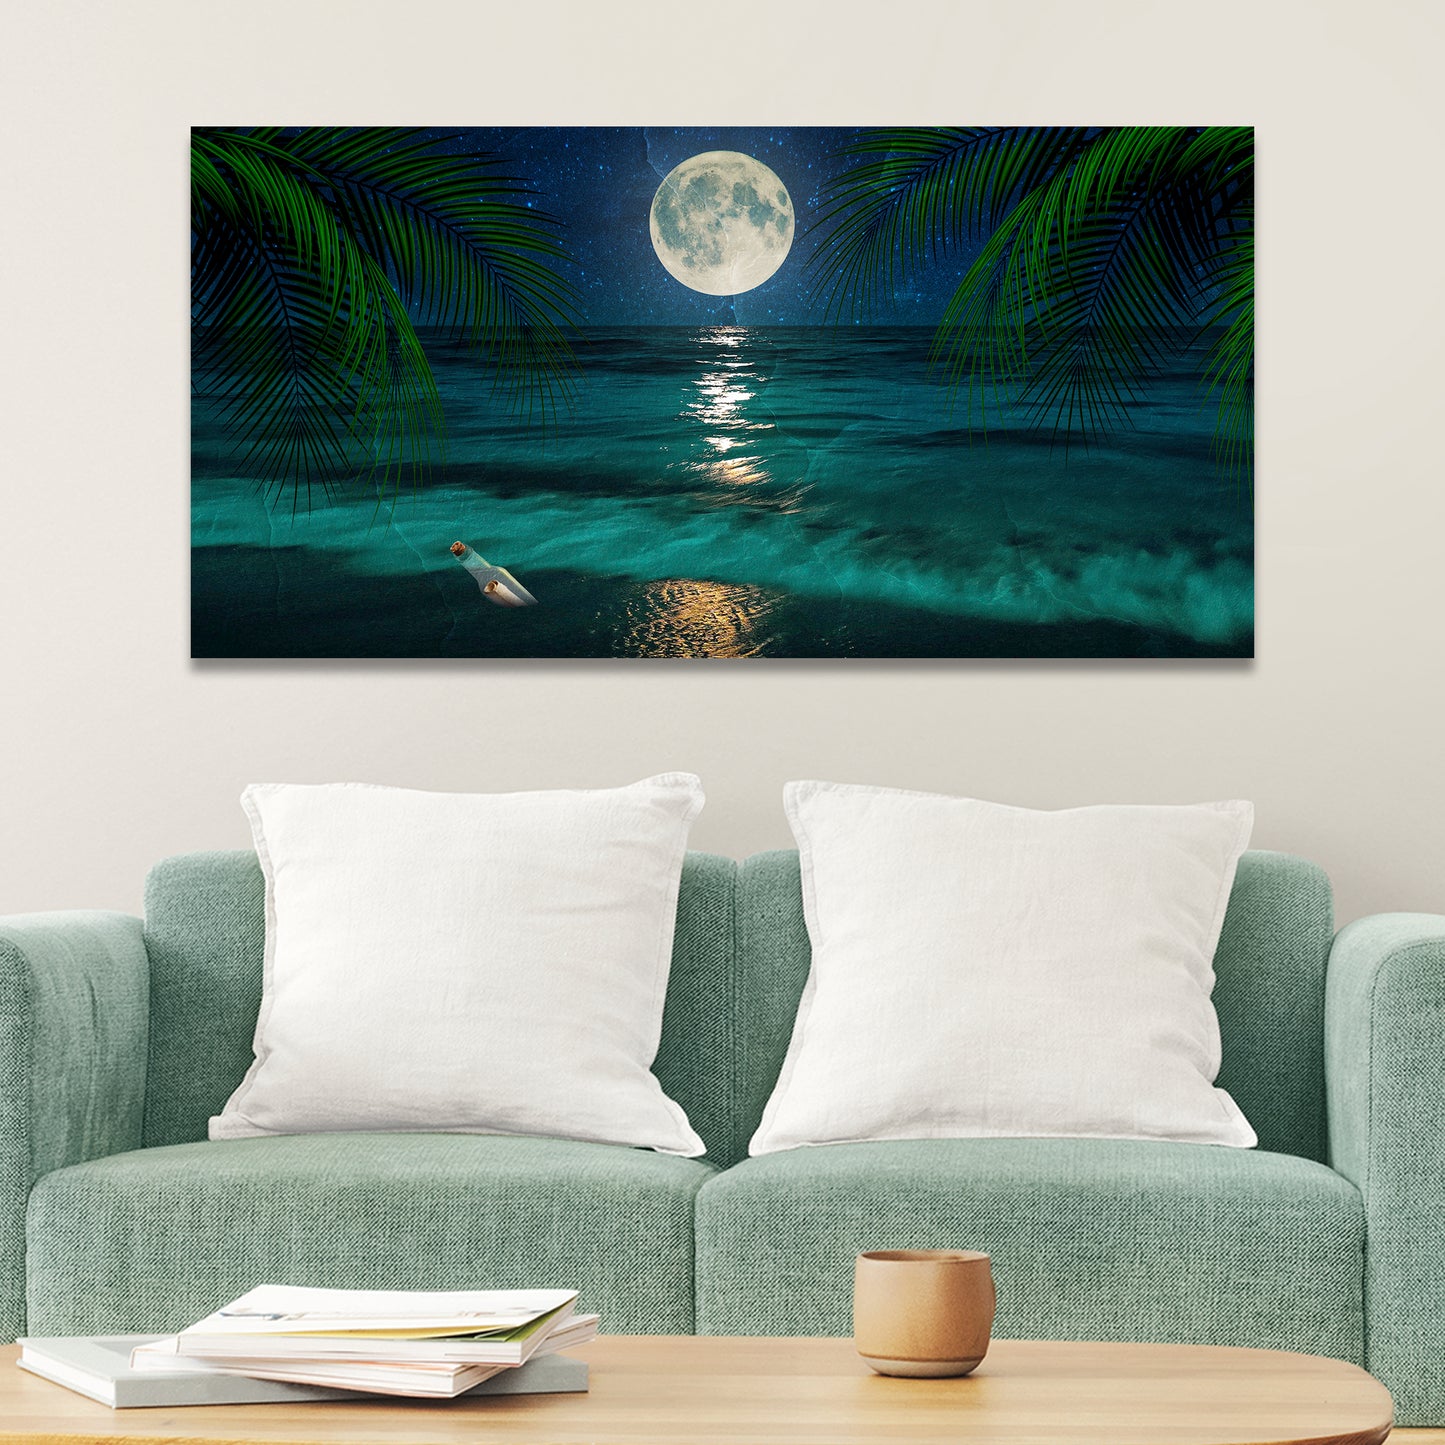 Full Moon Beach Shore Canvas Wall Art - Image by Tailored Canvases